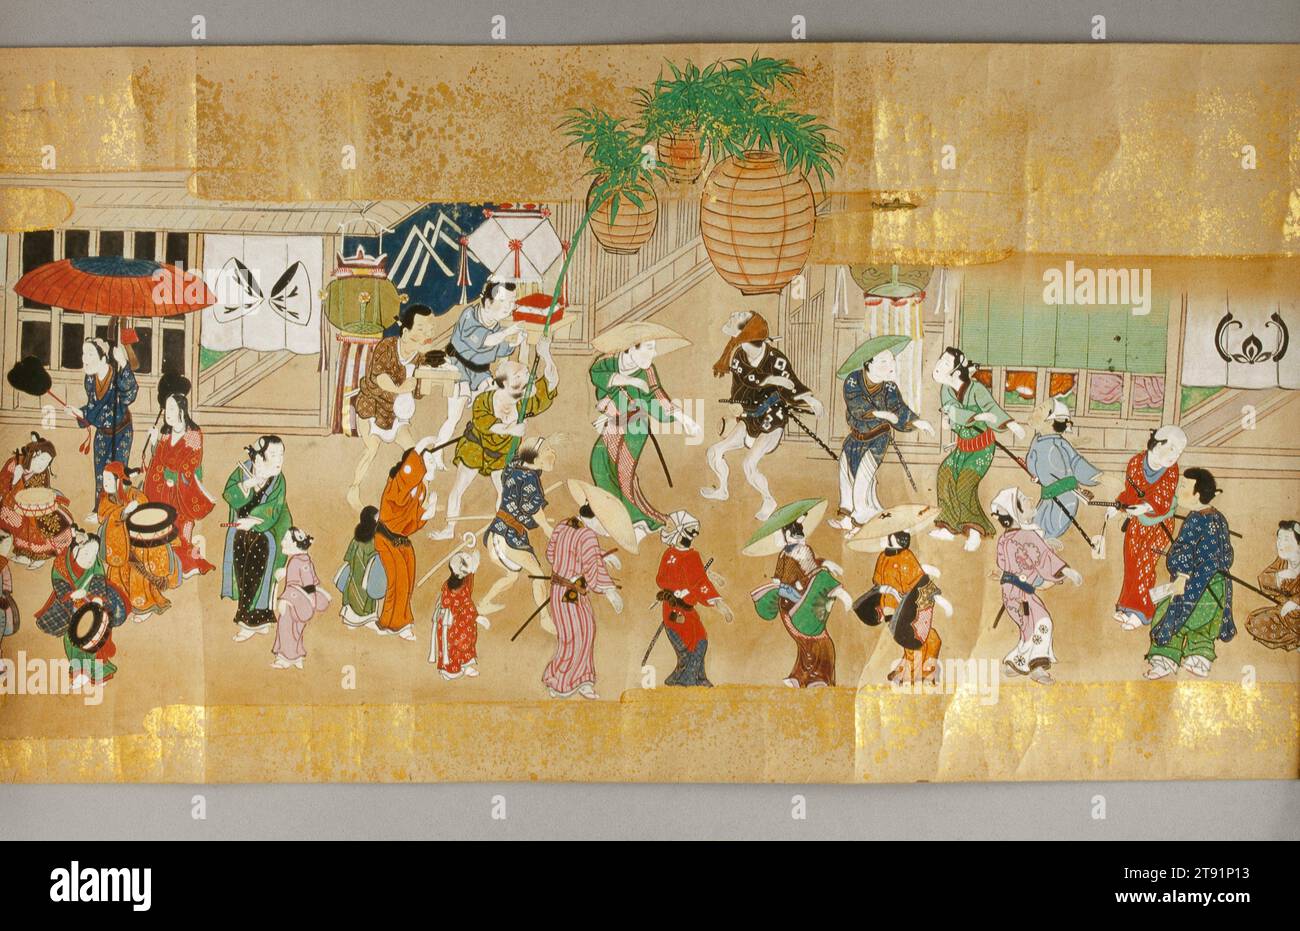 Activities of the Twelve Months, part 2 of a pair, late 17th - early 18th century, Unknown Japanese, 13 x 36 1/4 in. (33 x 92 cm) (image)13 x 378 3/4 in. (33 x 962 cm) (mount), Ink, color, and gold on paper, Japan, Nikuhitsu ukiyo-e Stock Photo